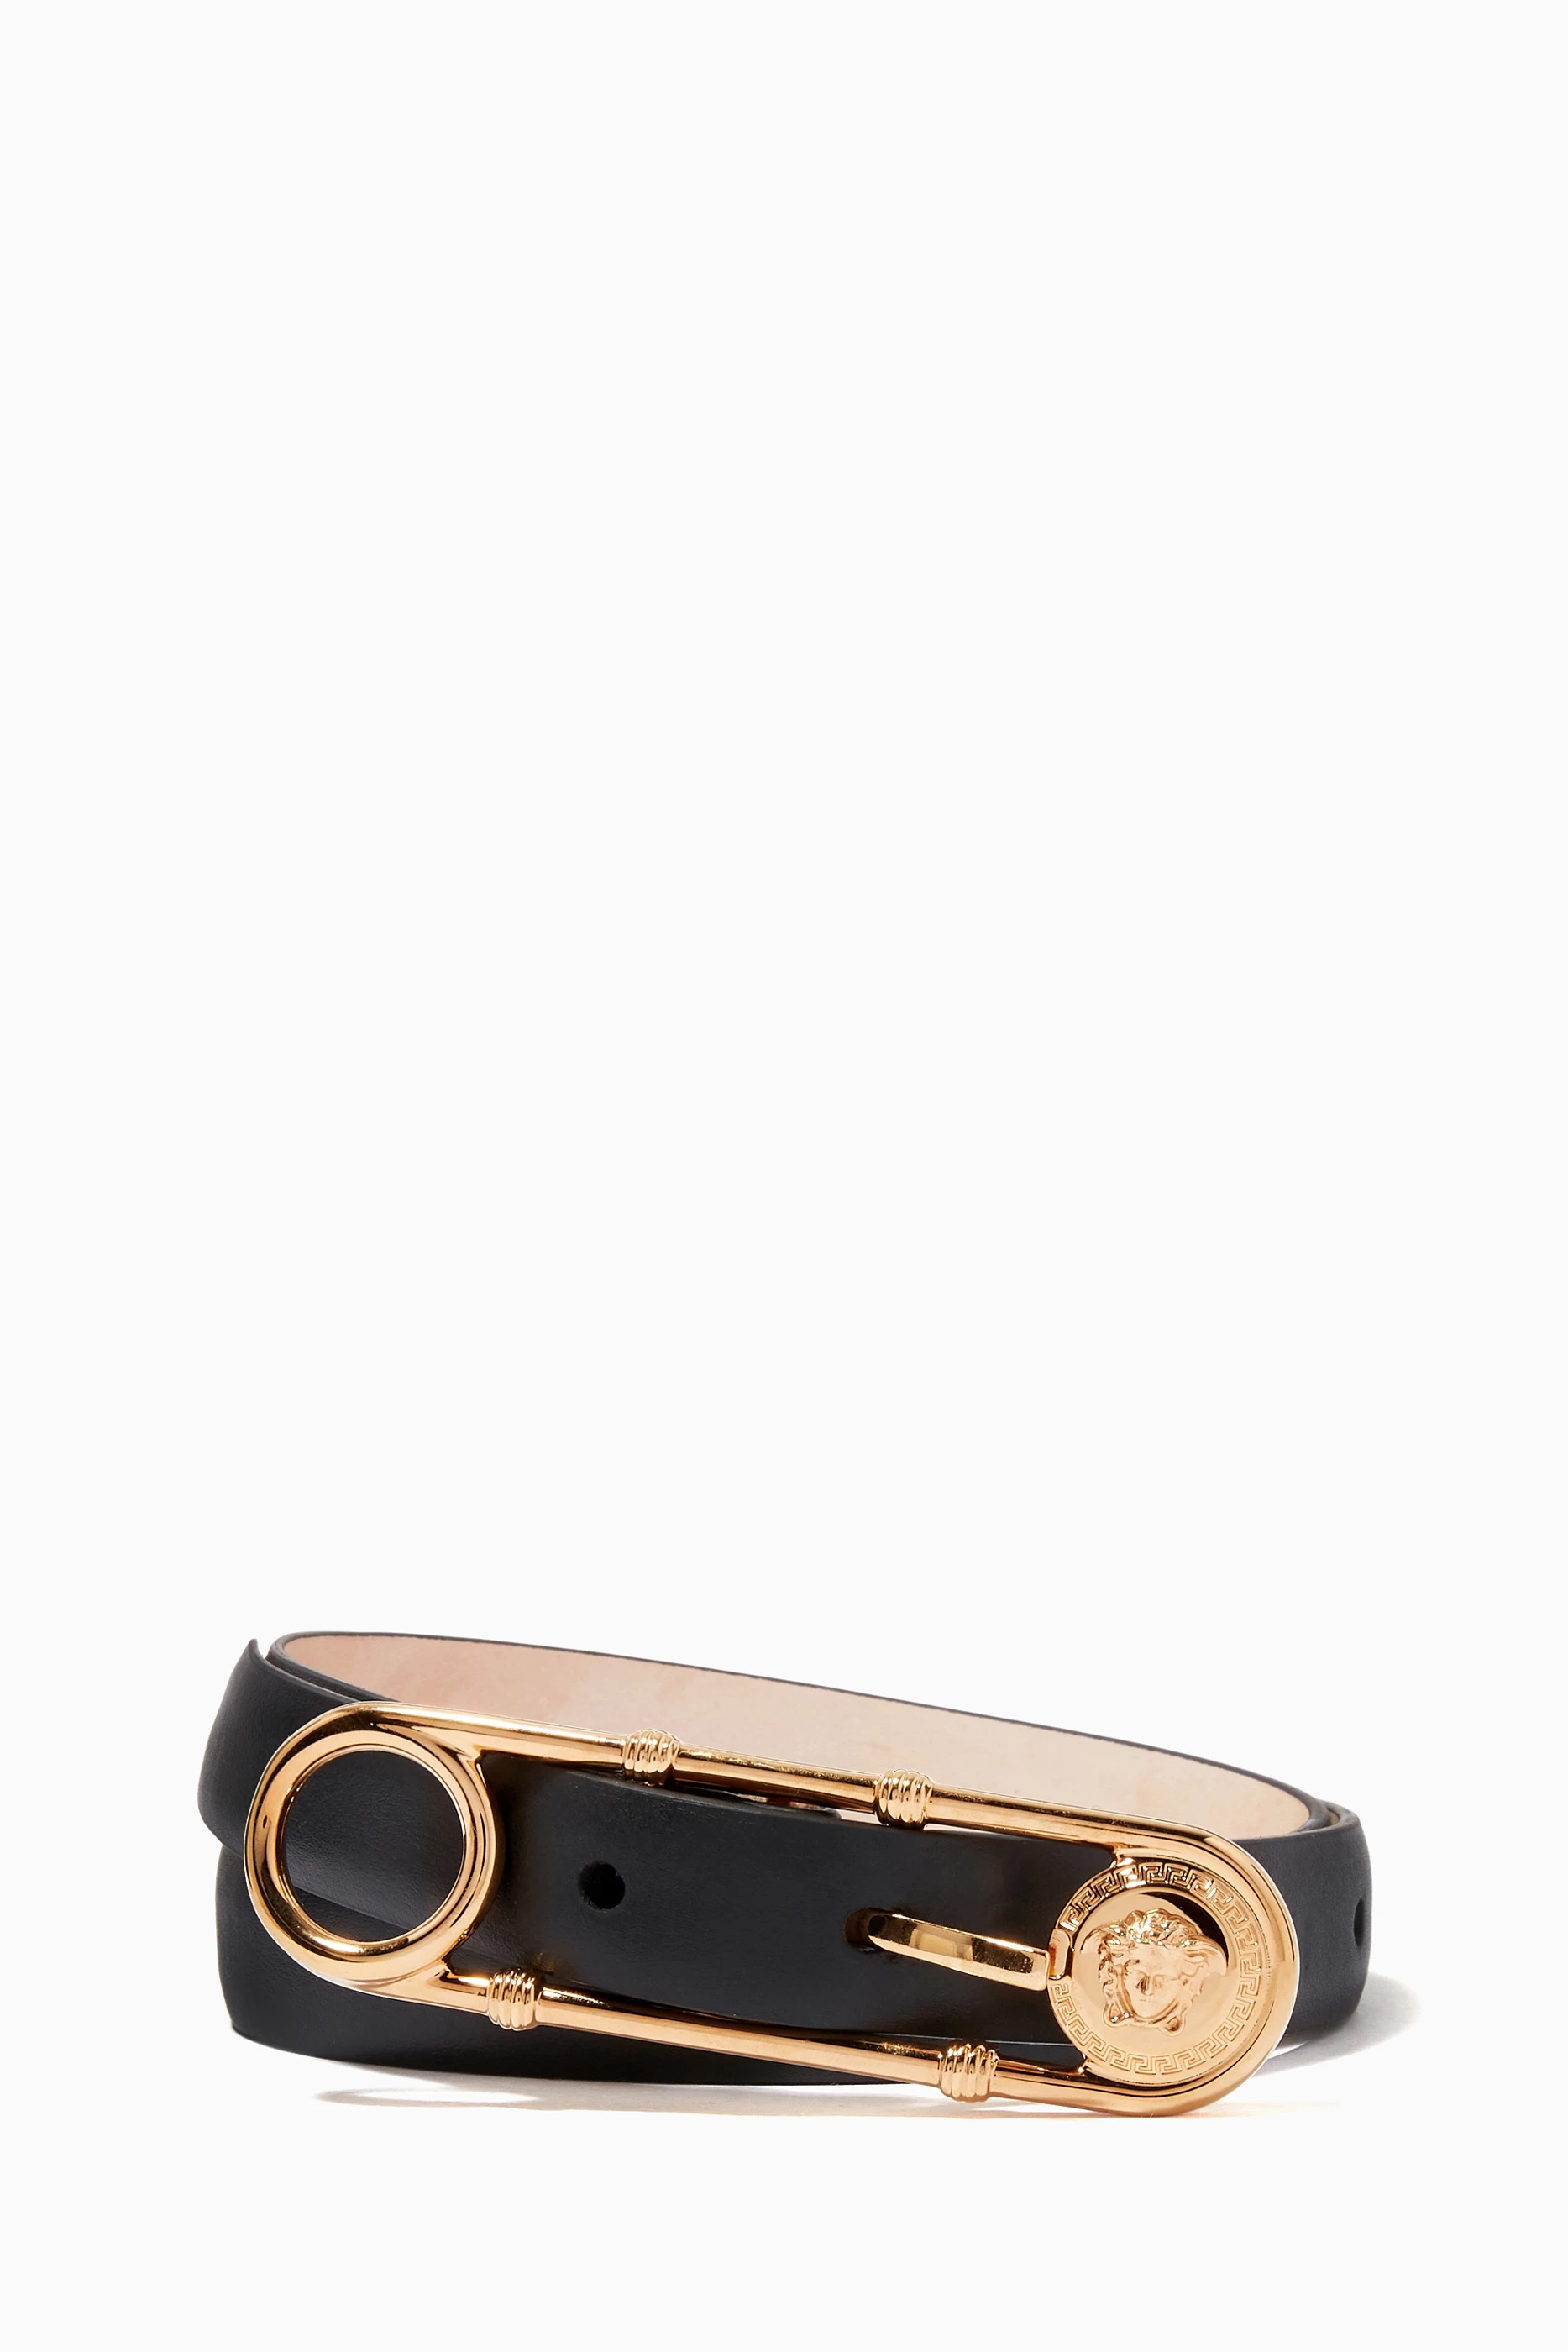 Versace Safety Pin Leather Belt in Black Womens Accessories Belts 